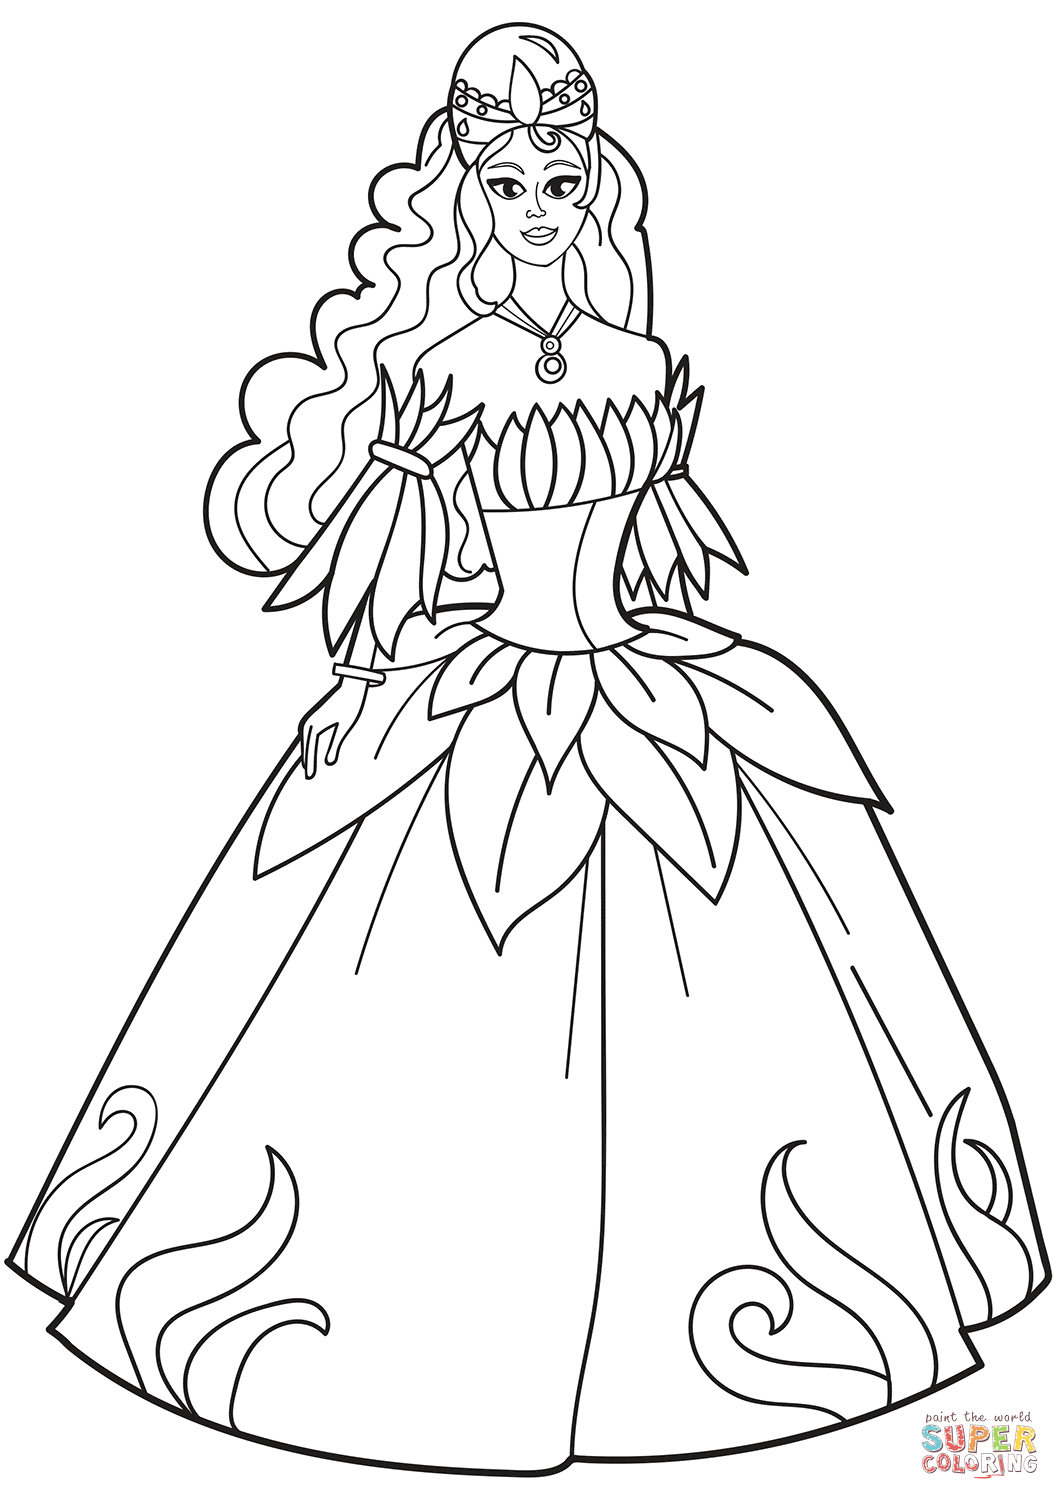 Princess Dress Coloring Pages   Coloring Home